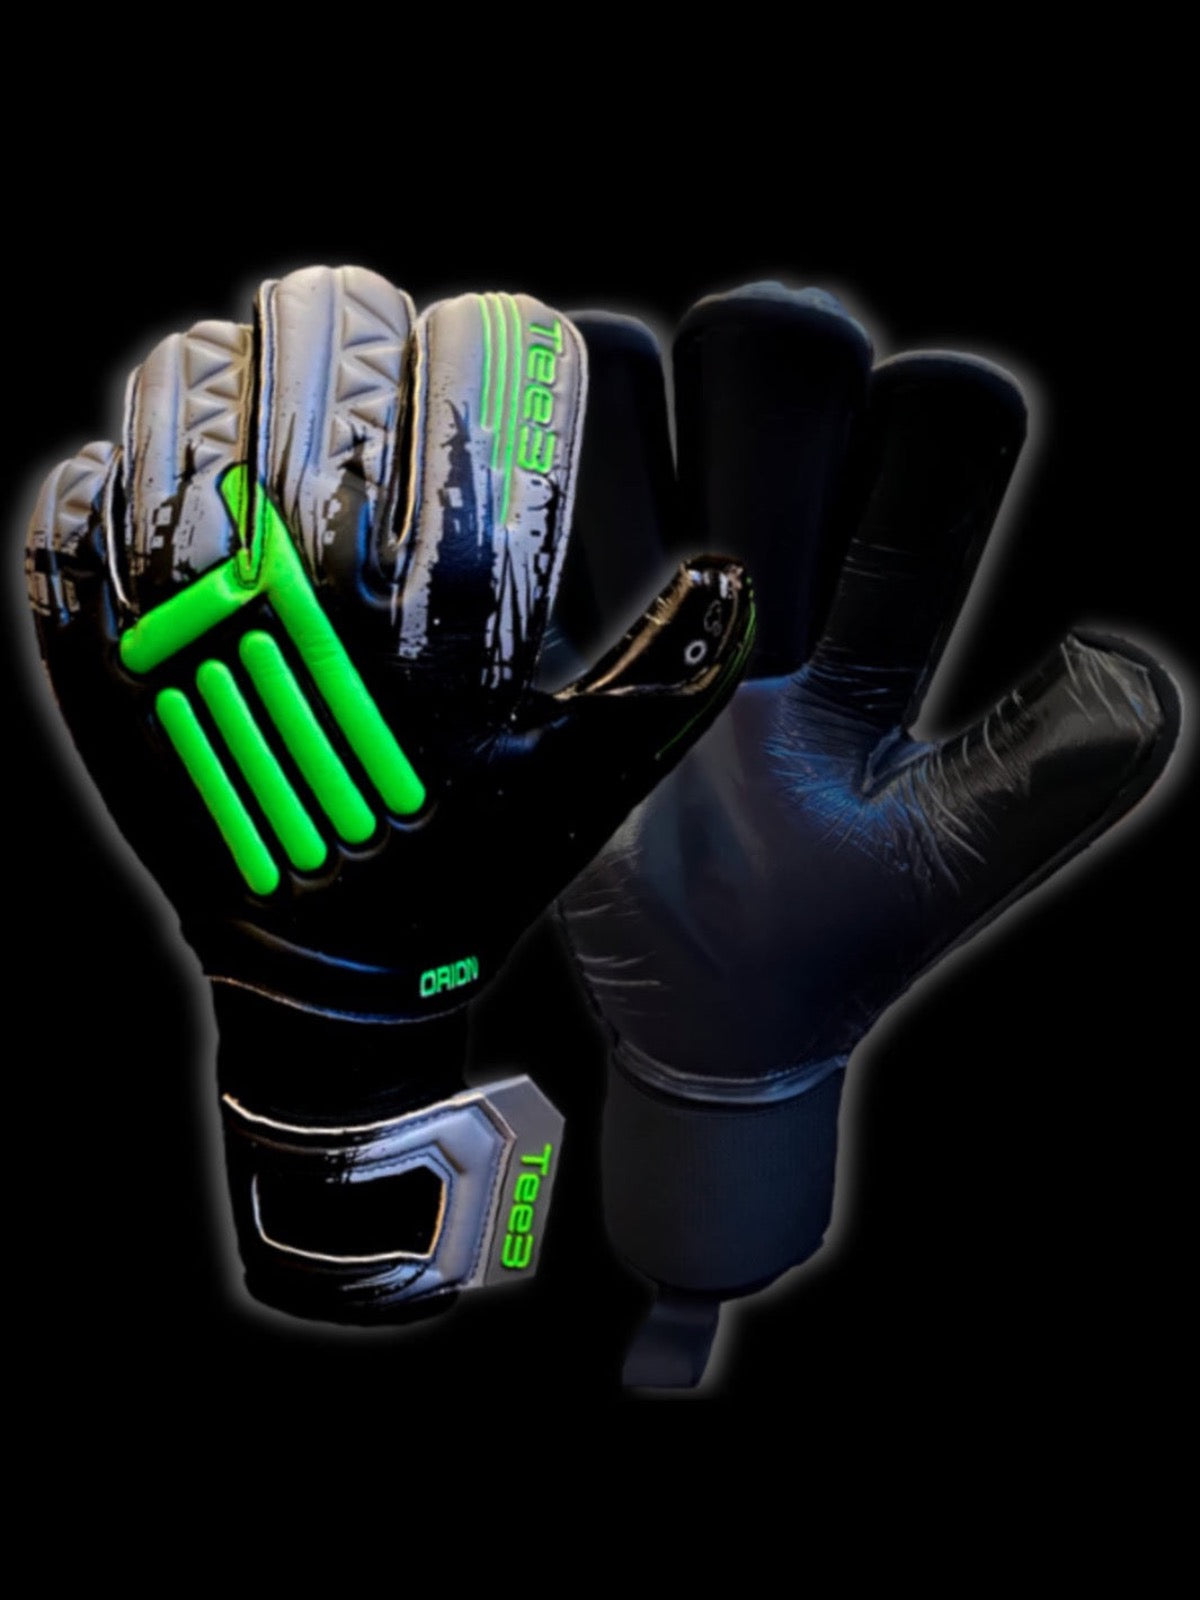 A roll finger goalkeeping glove with black contact latex worn by professional goalkeepers